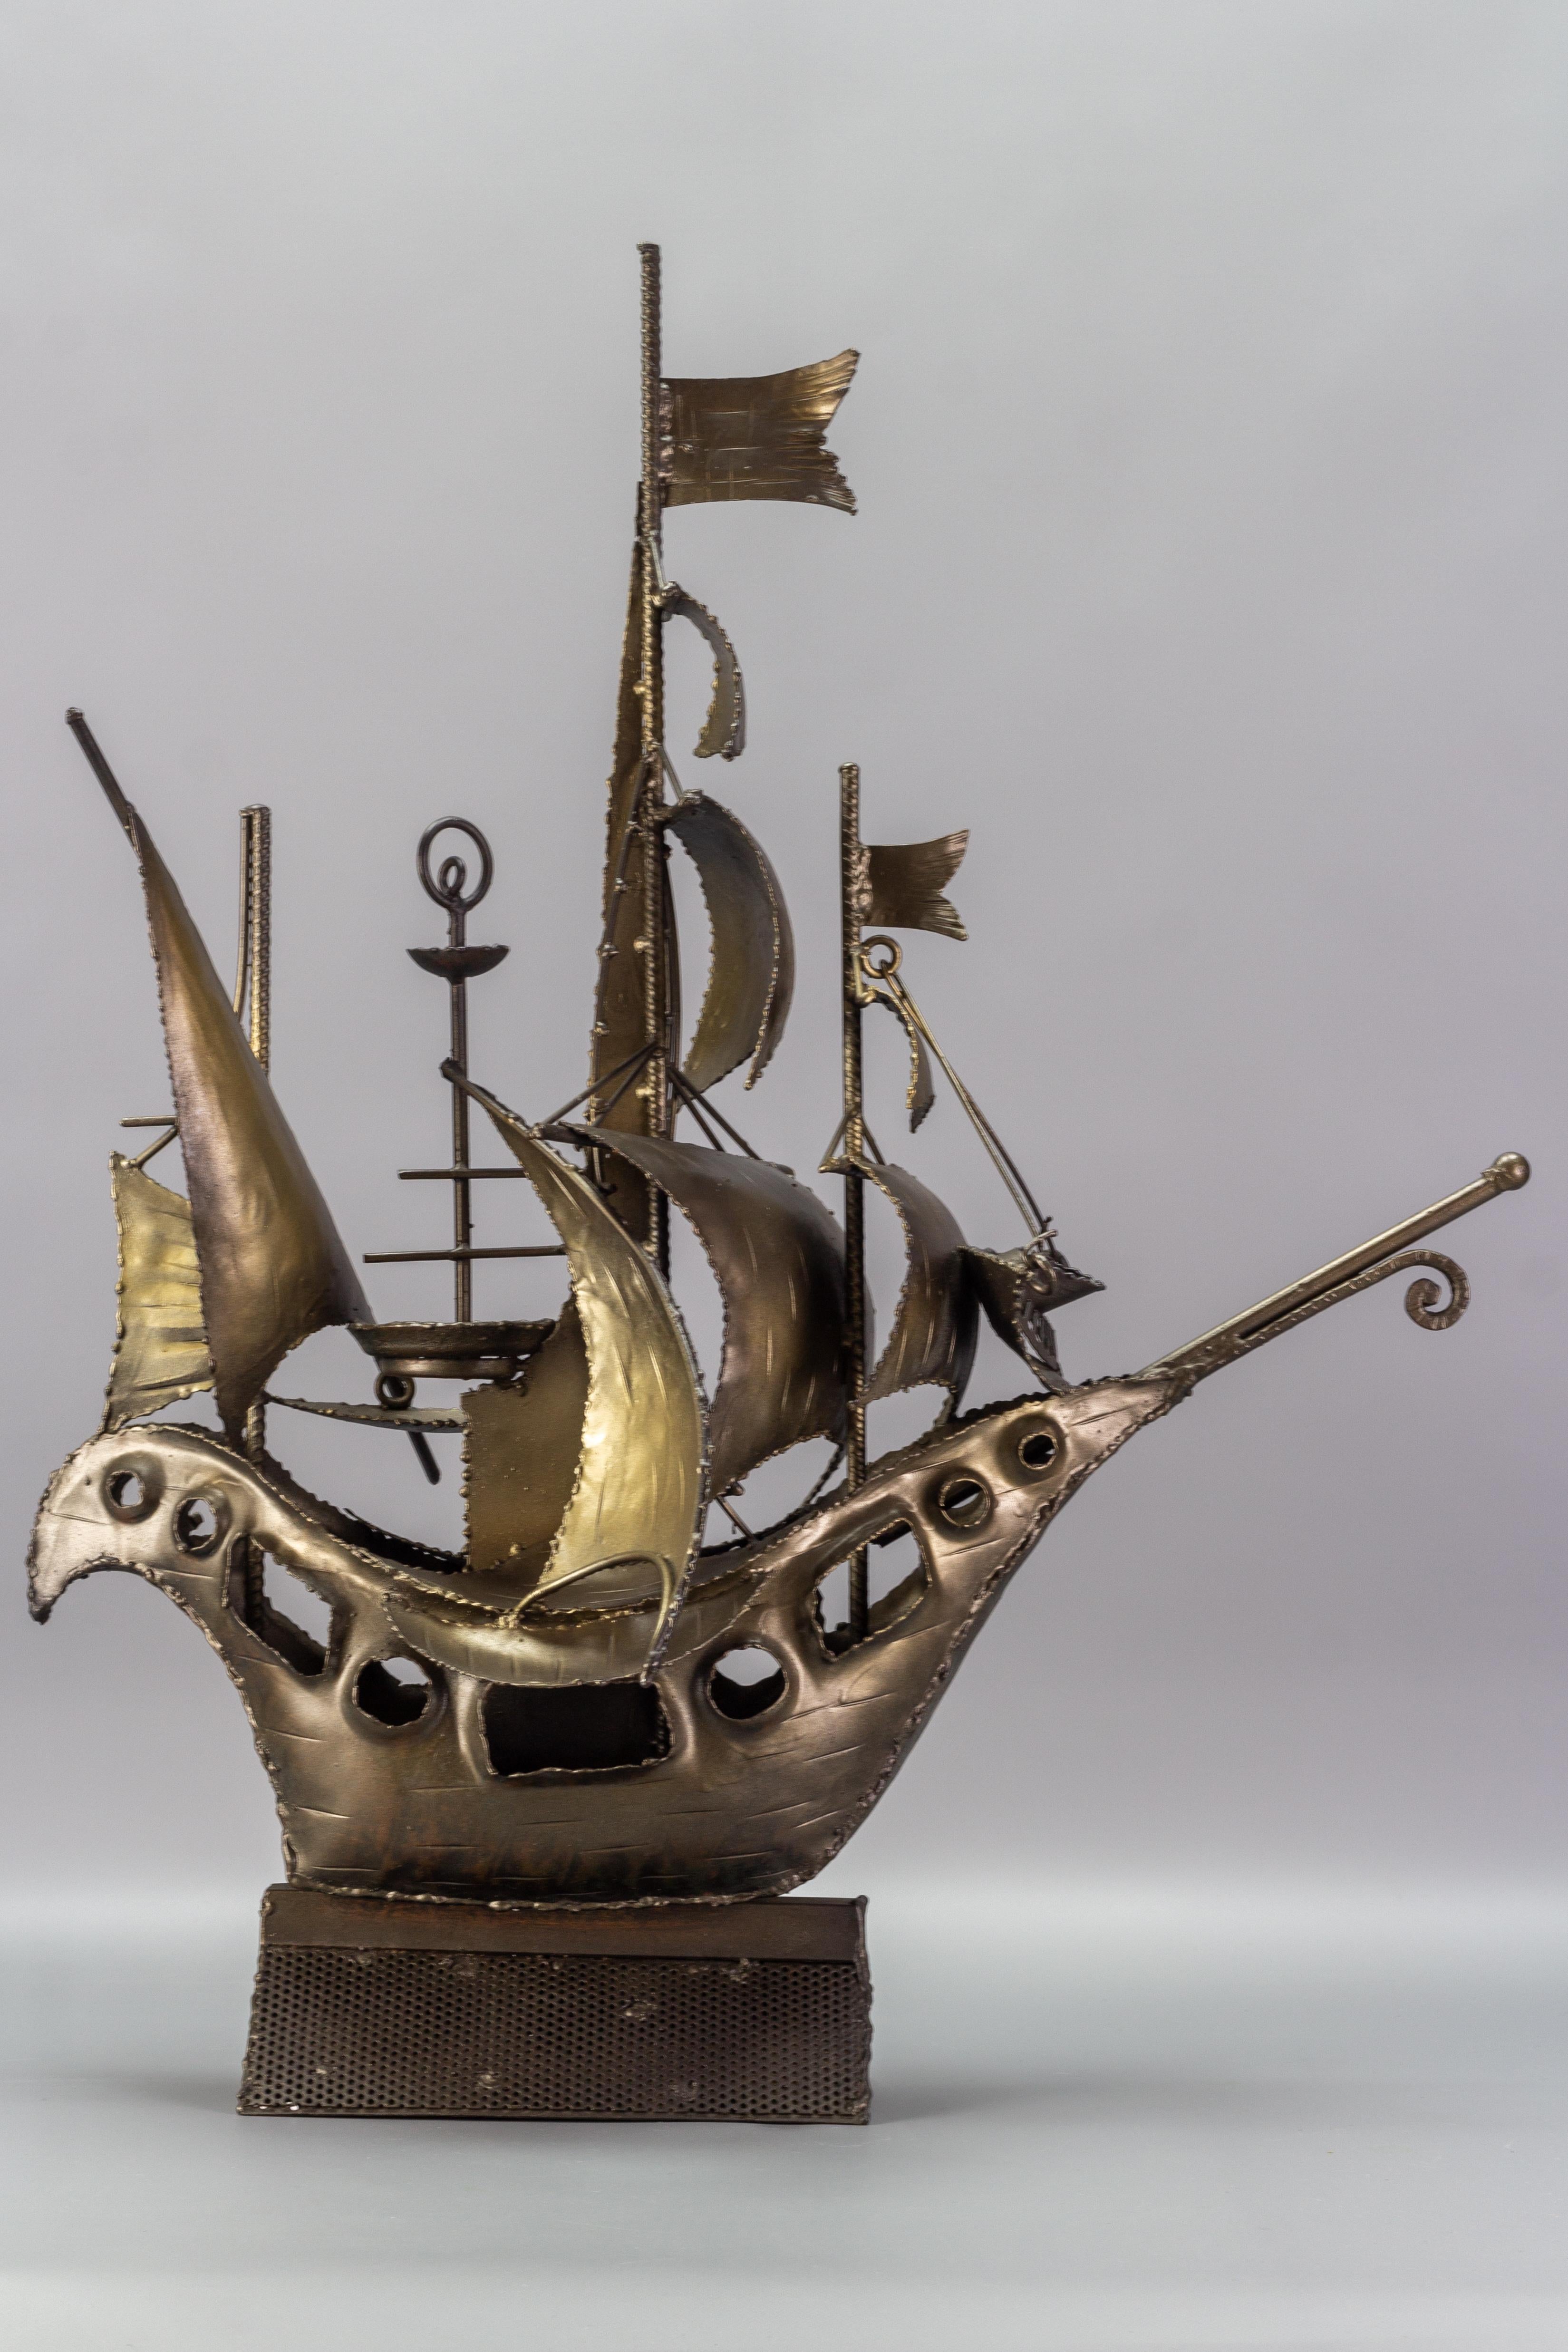 Hand-Crafted Industrial Style Metal Art Sailing Ship Sculpture For Sale